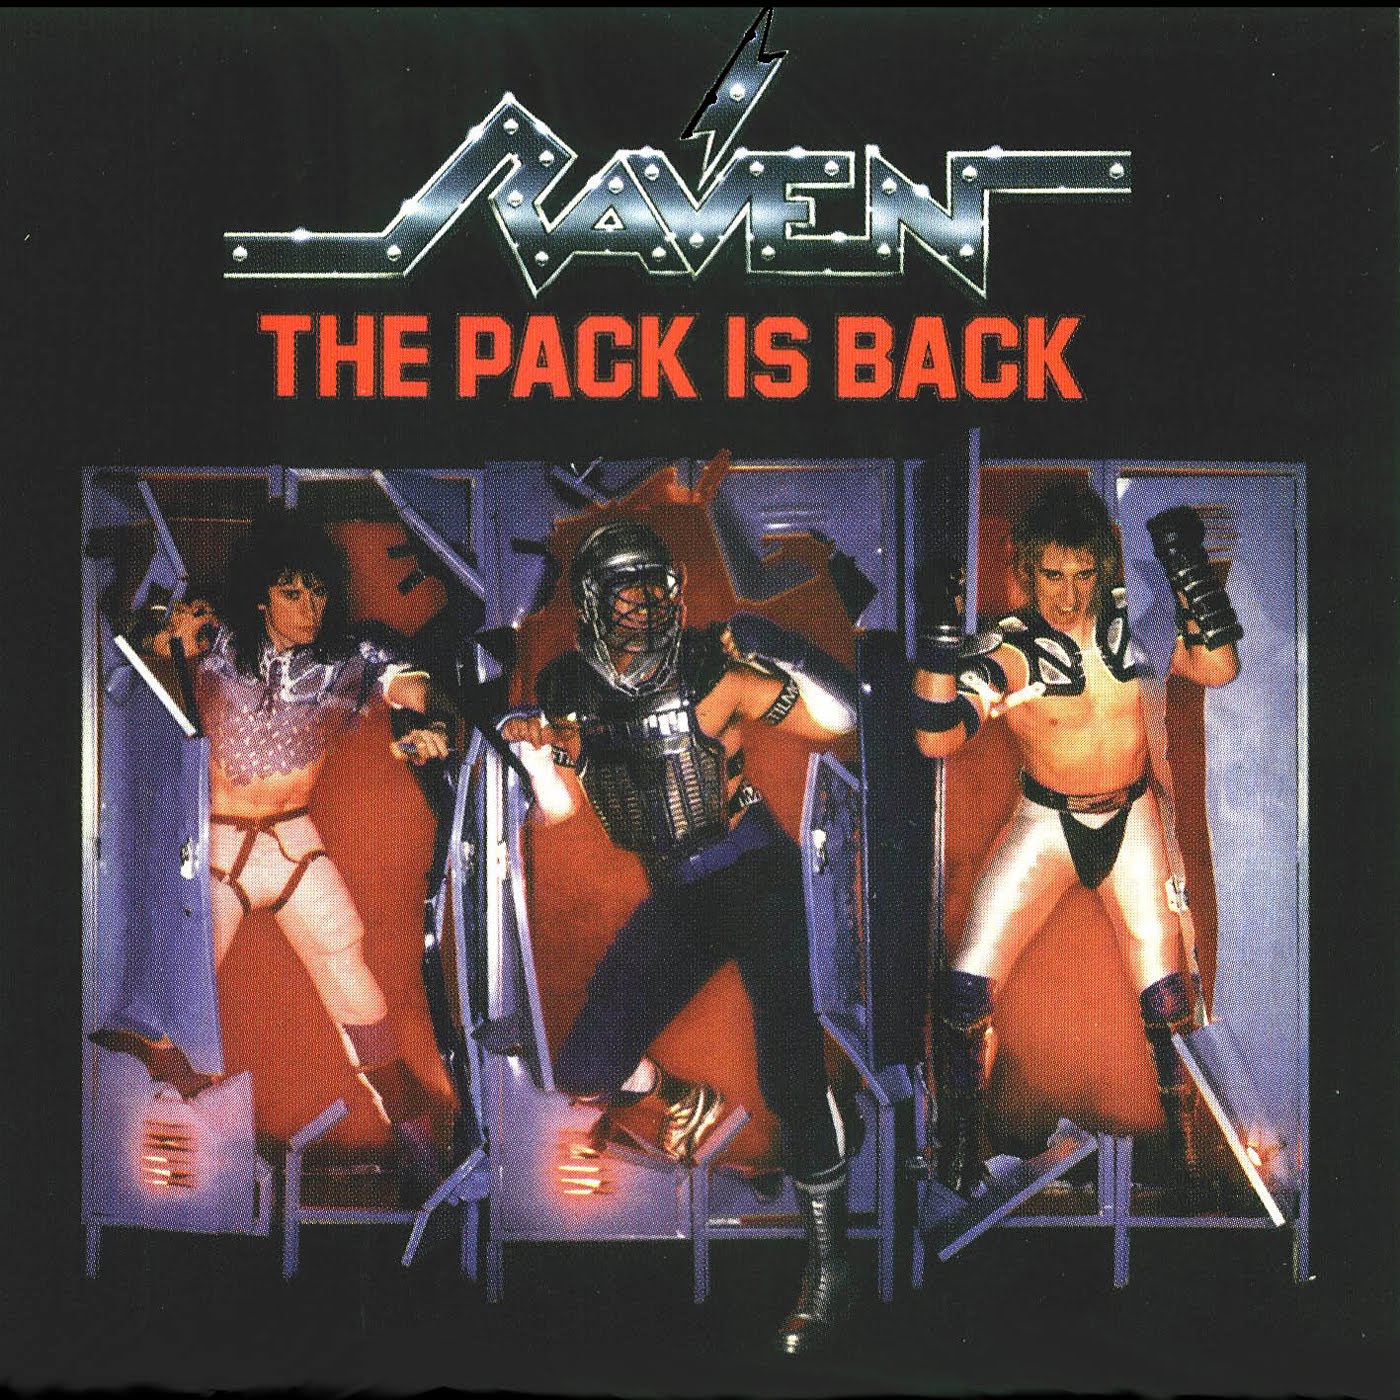 Raven_The_Pack_Is_Back_front.jpg